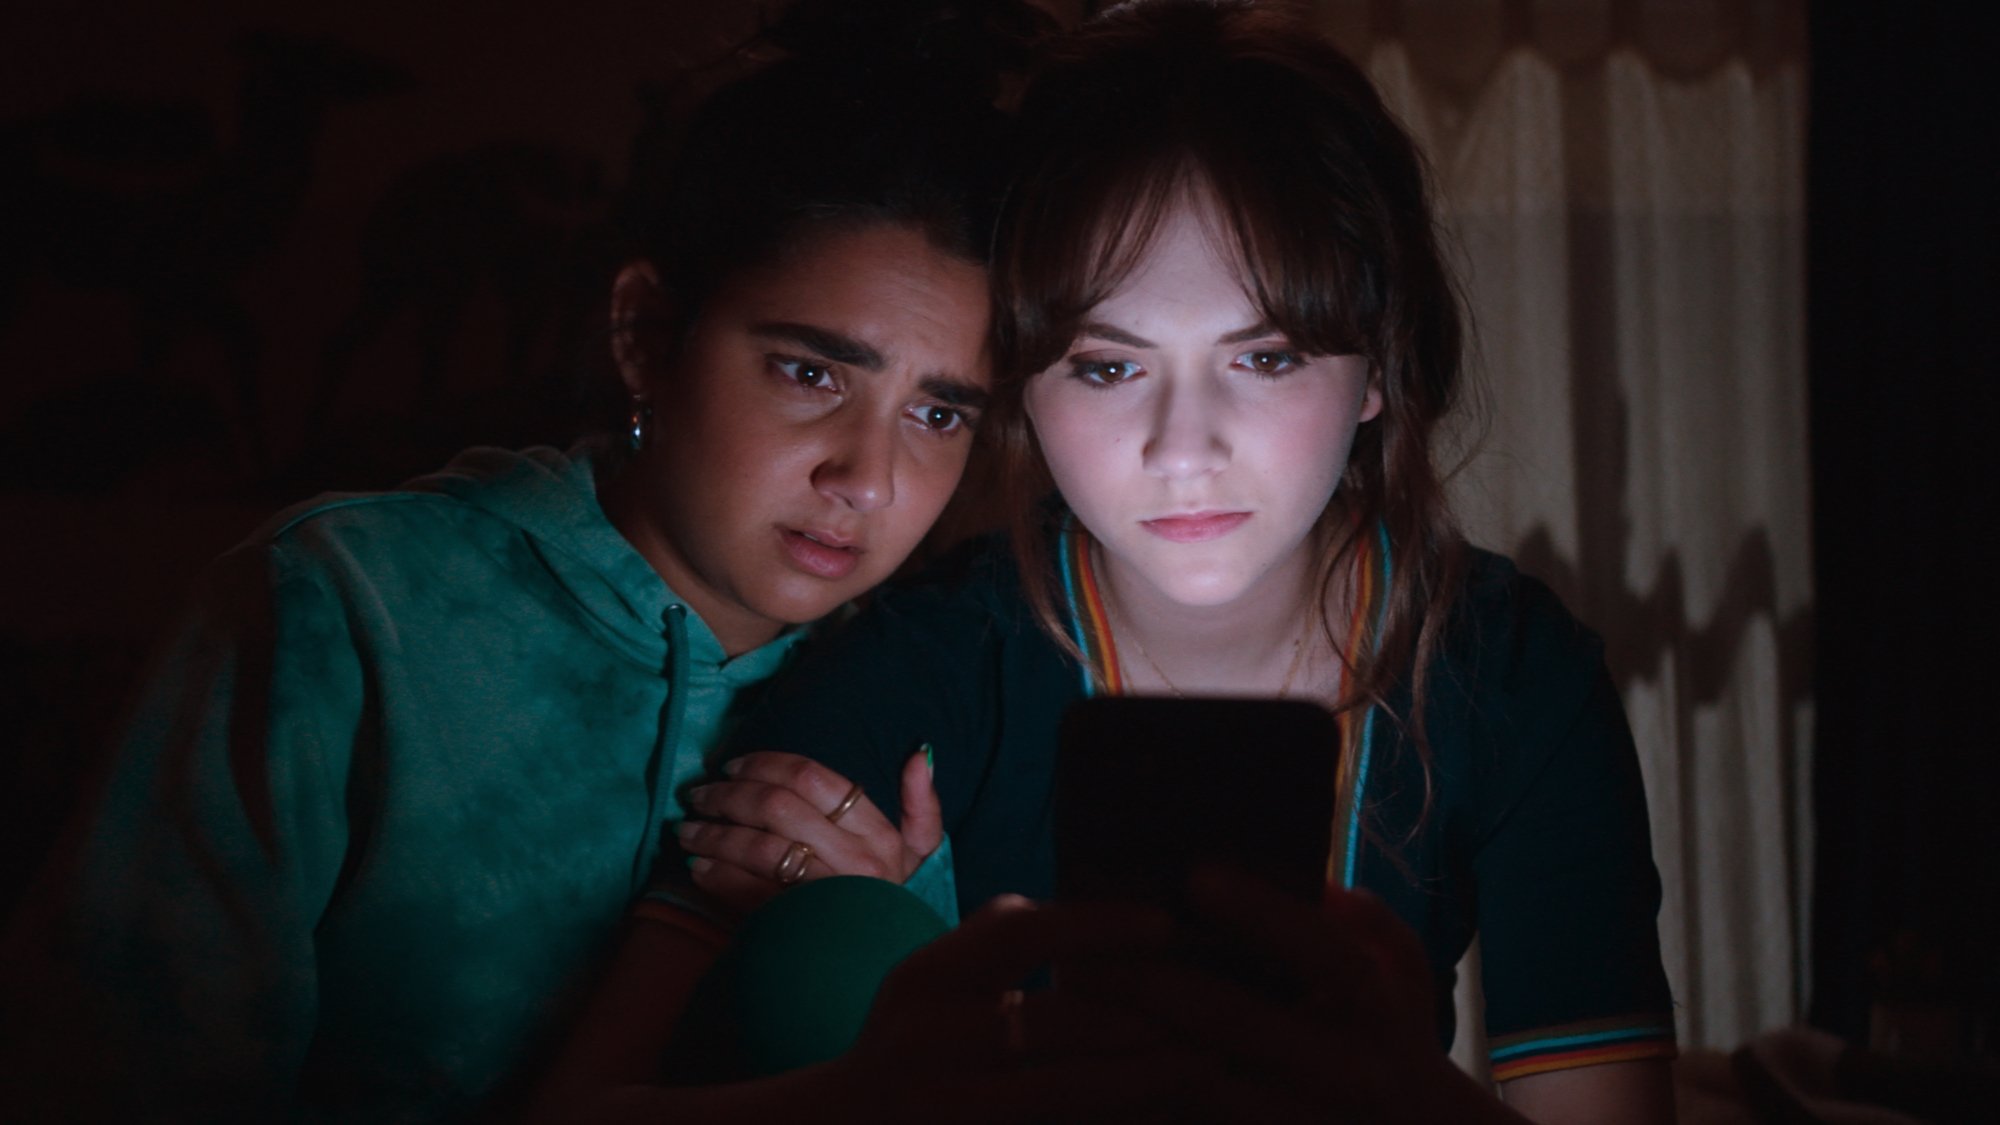 'Cat Person' Geraldine Viswanathan as Taylor and Emilia Jones as Margot looking shocked in a dark room lit by Margot's phone.